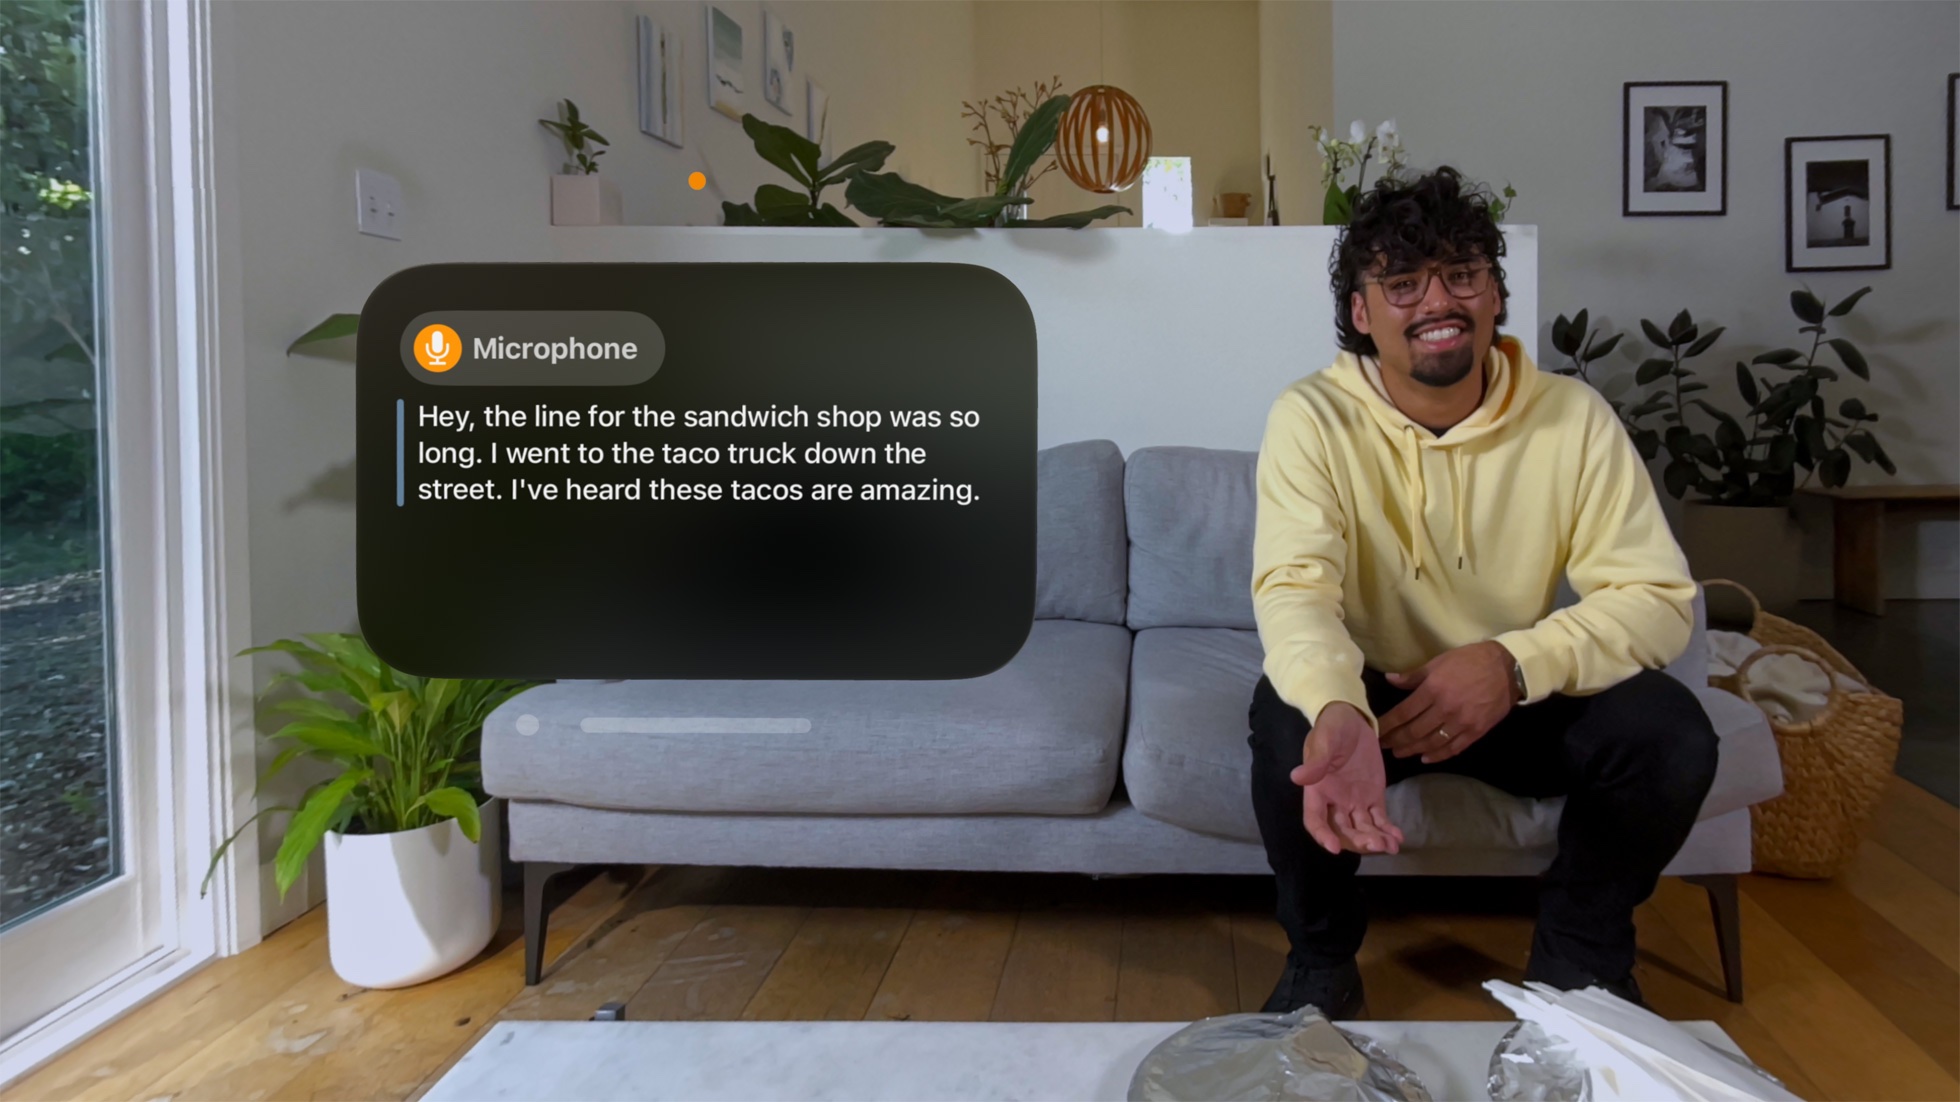 A look at Live Captions in visionOS on Apple Vision Pro